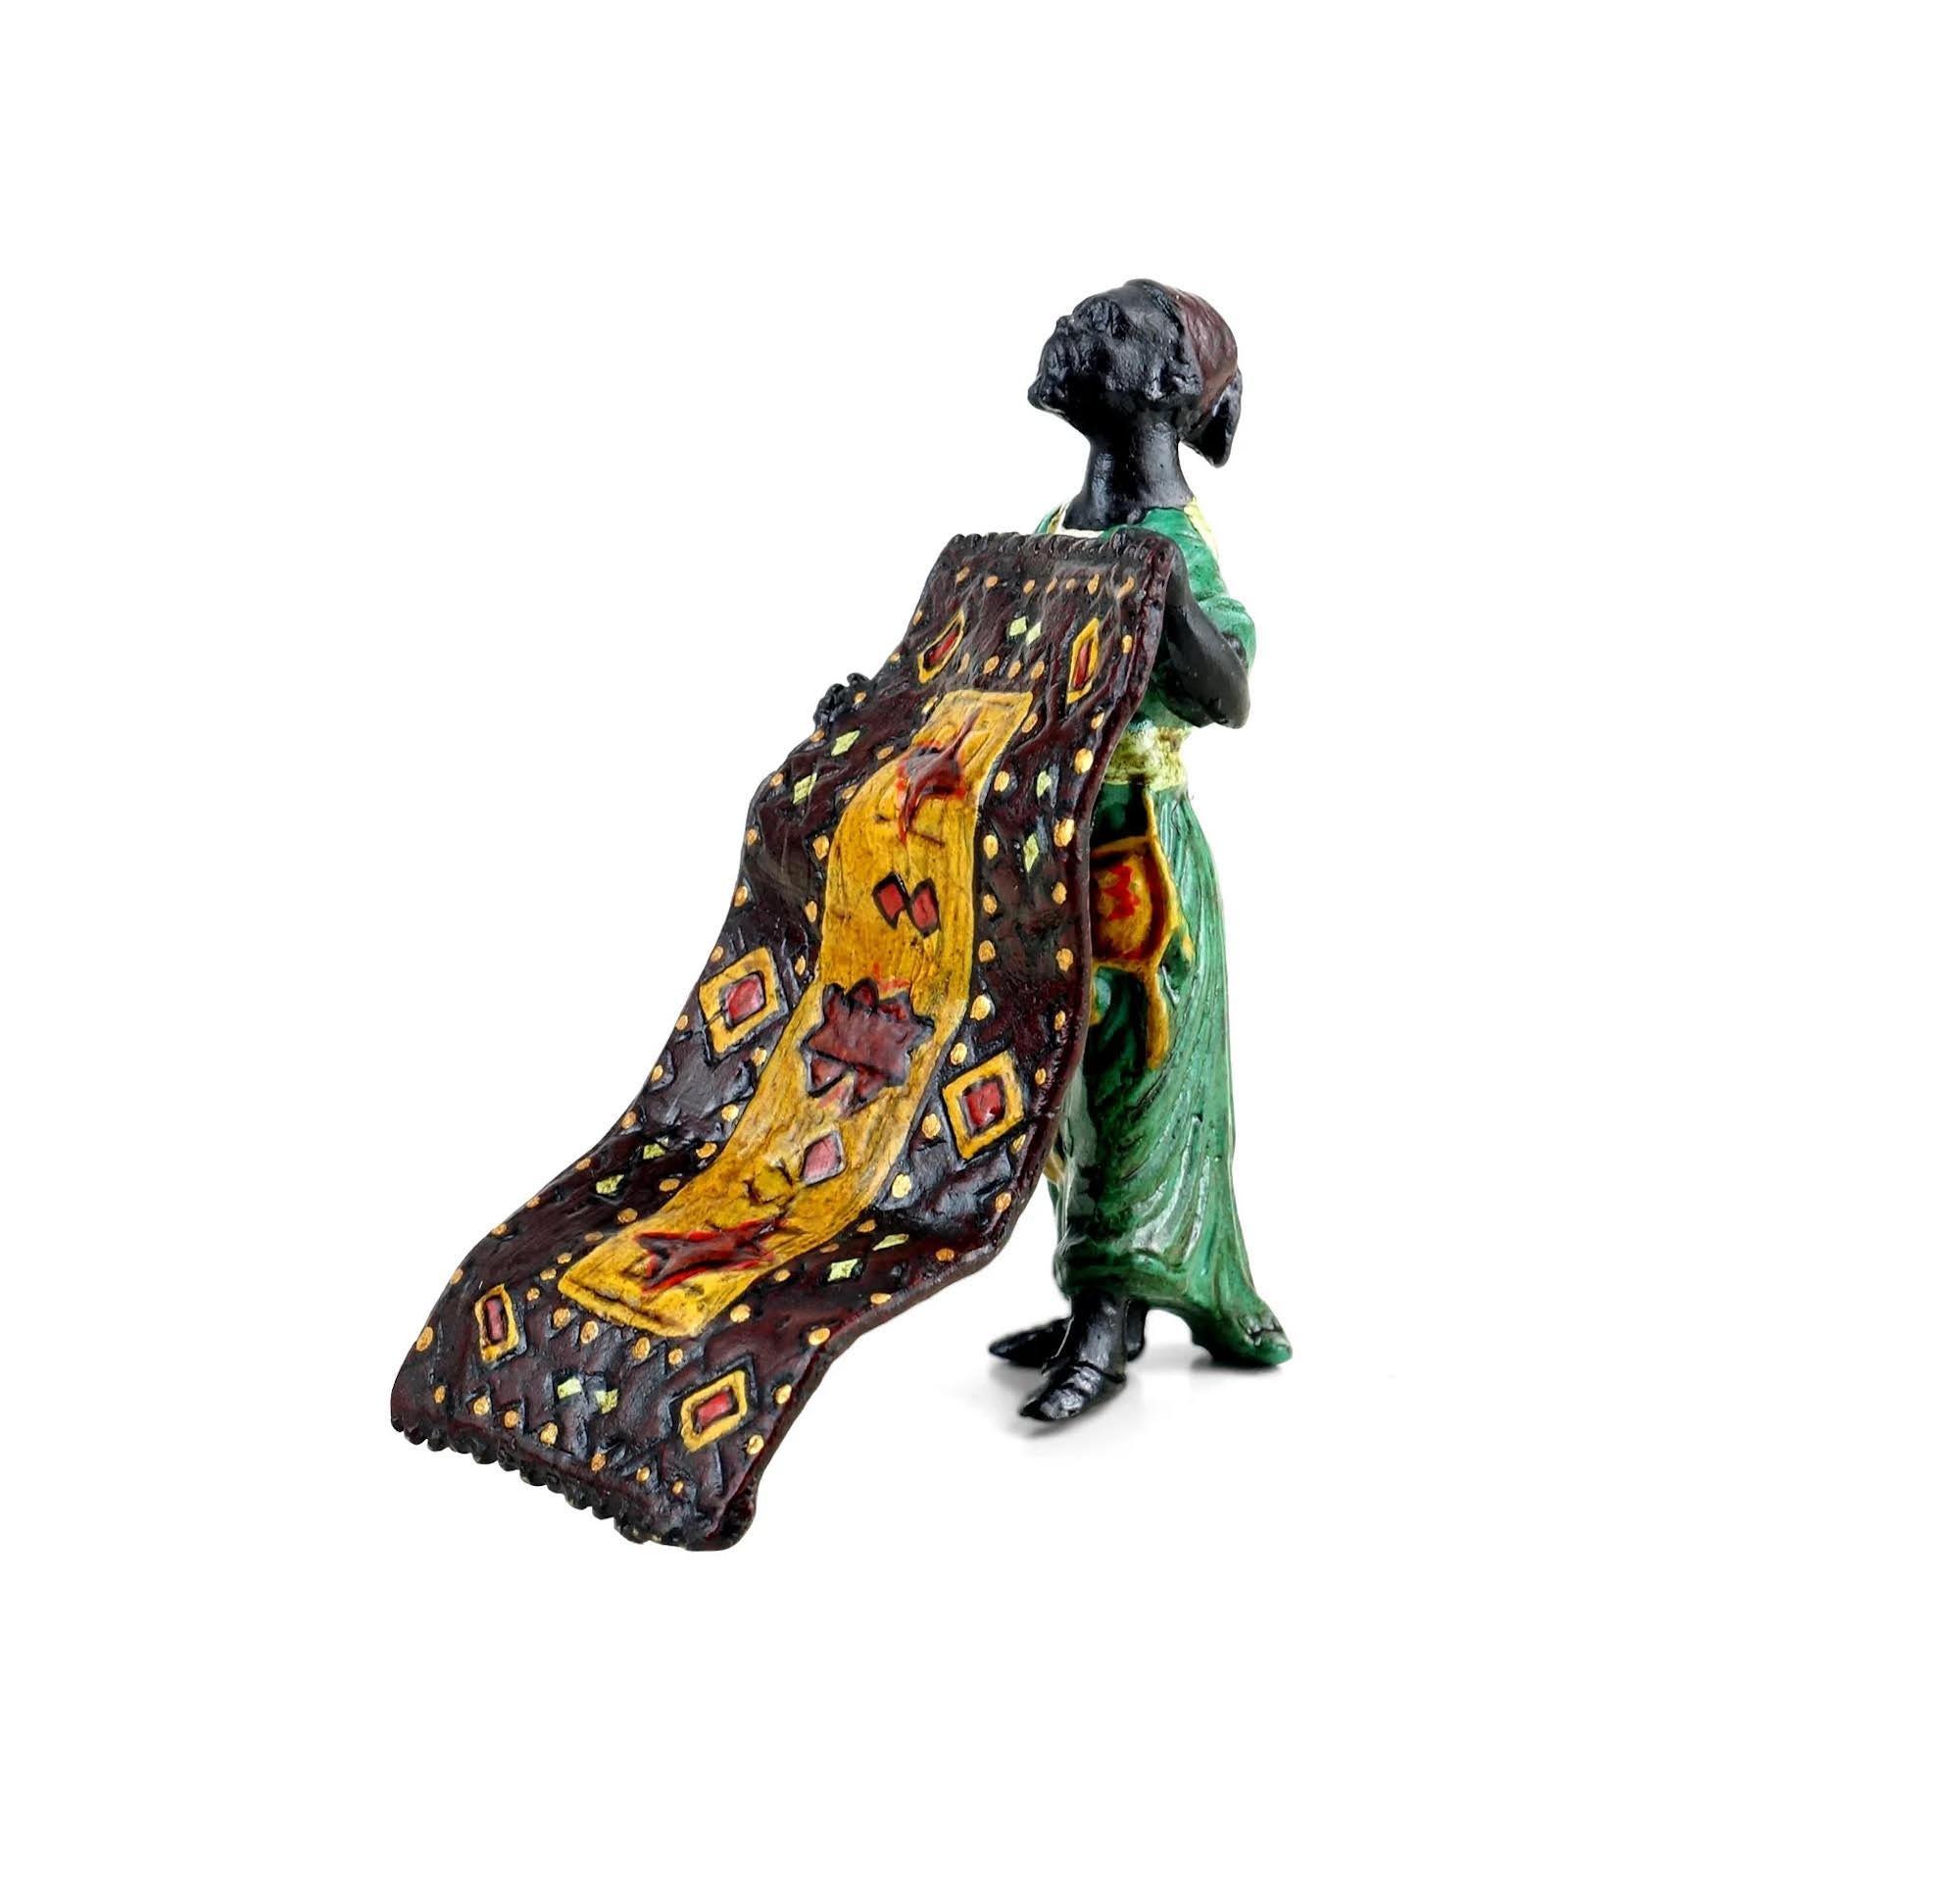 Sculpture, Bronze of Vienna, representing an Orientalist carpet merchant, signed, modern production of Beautiful quality.
Estimated production time: 1 to 2 weeks.

W: 5cm, H: 8cm, D: 6cm